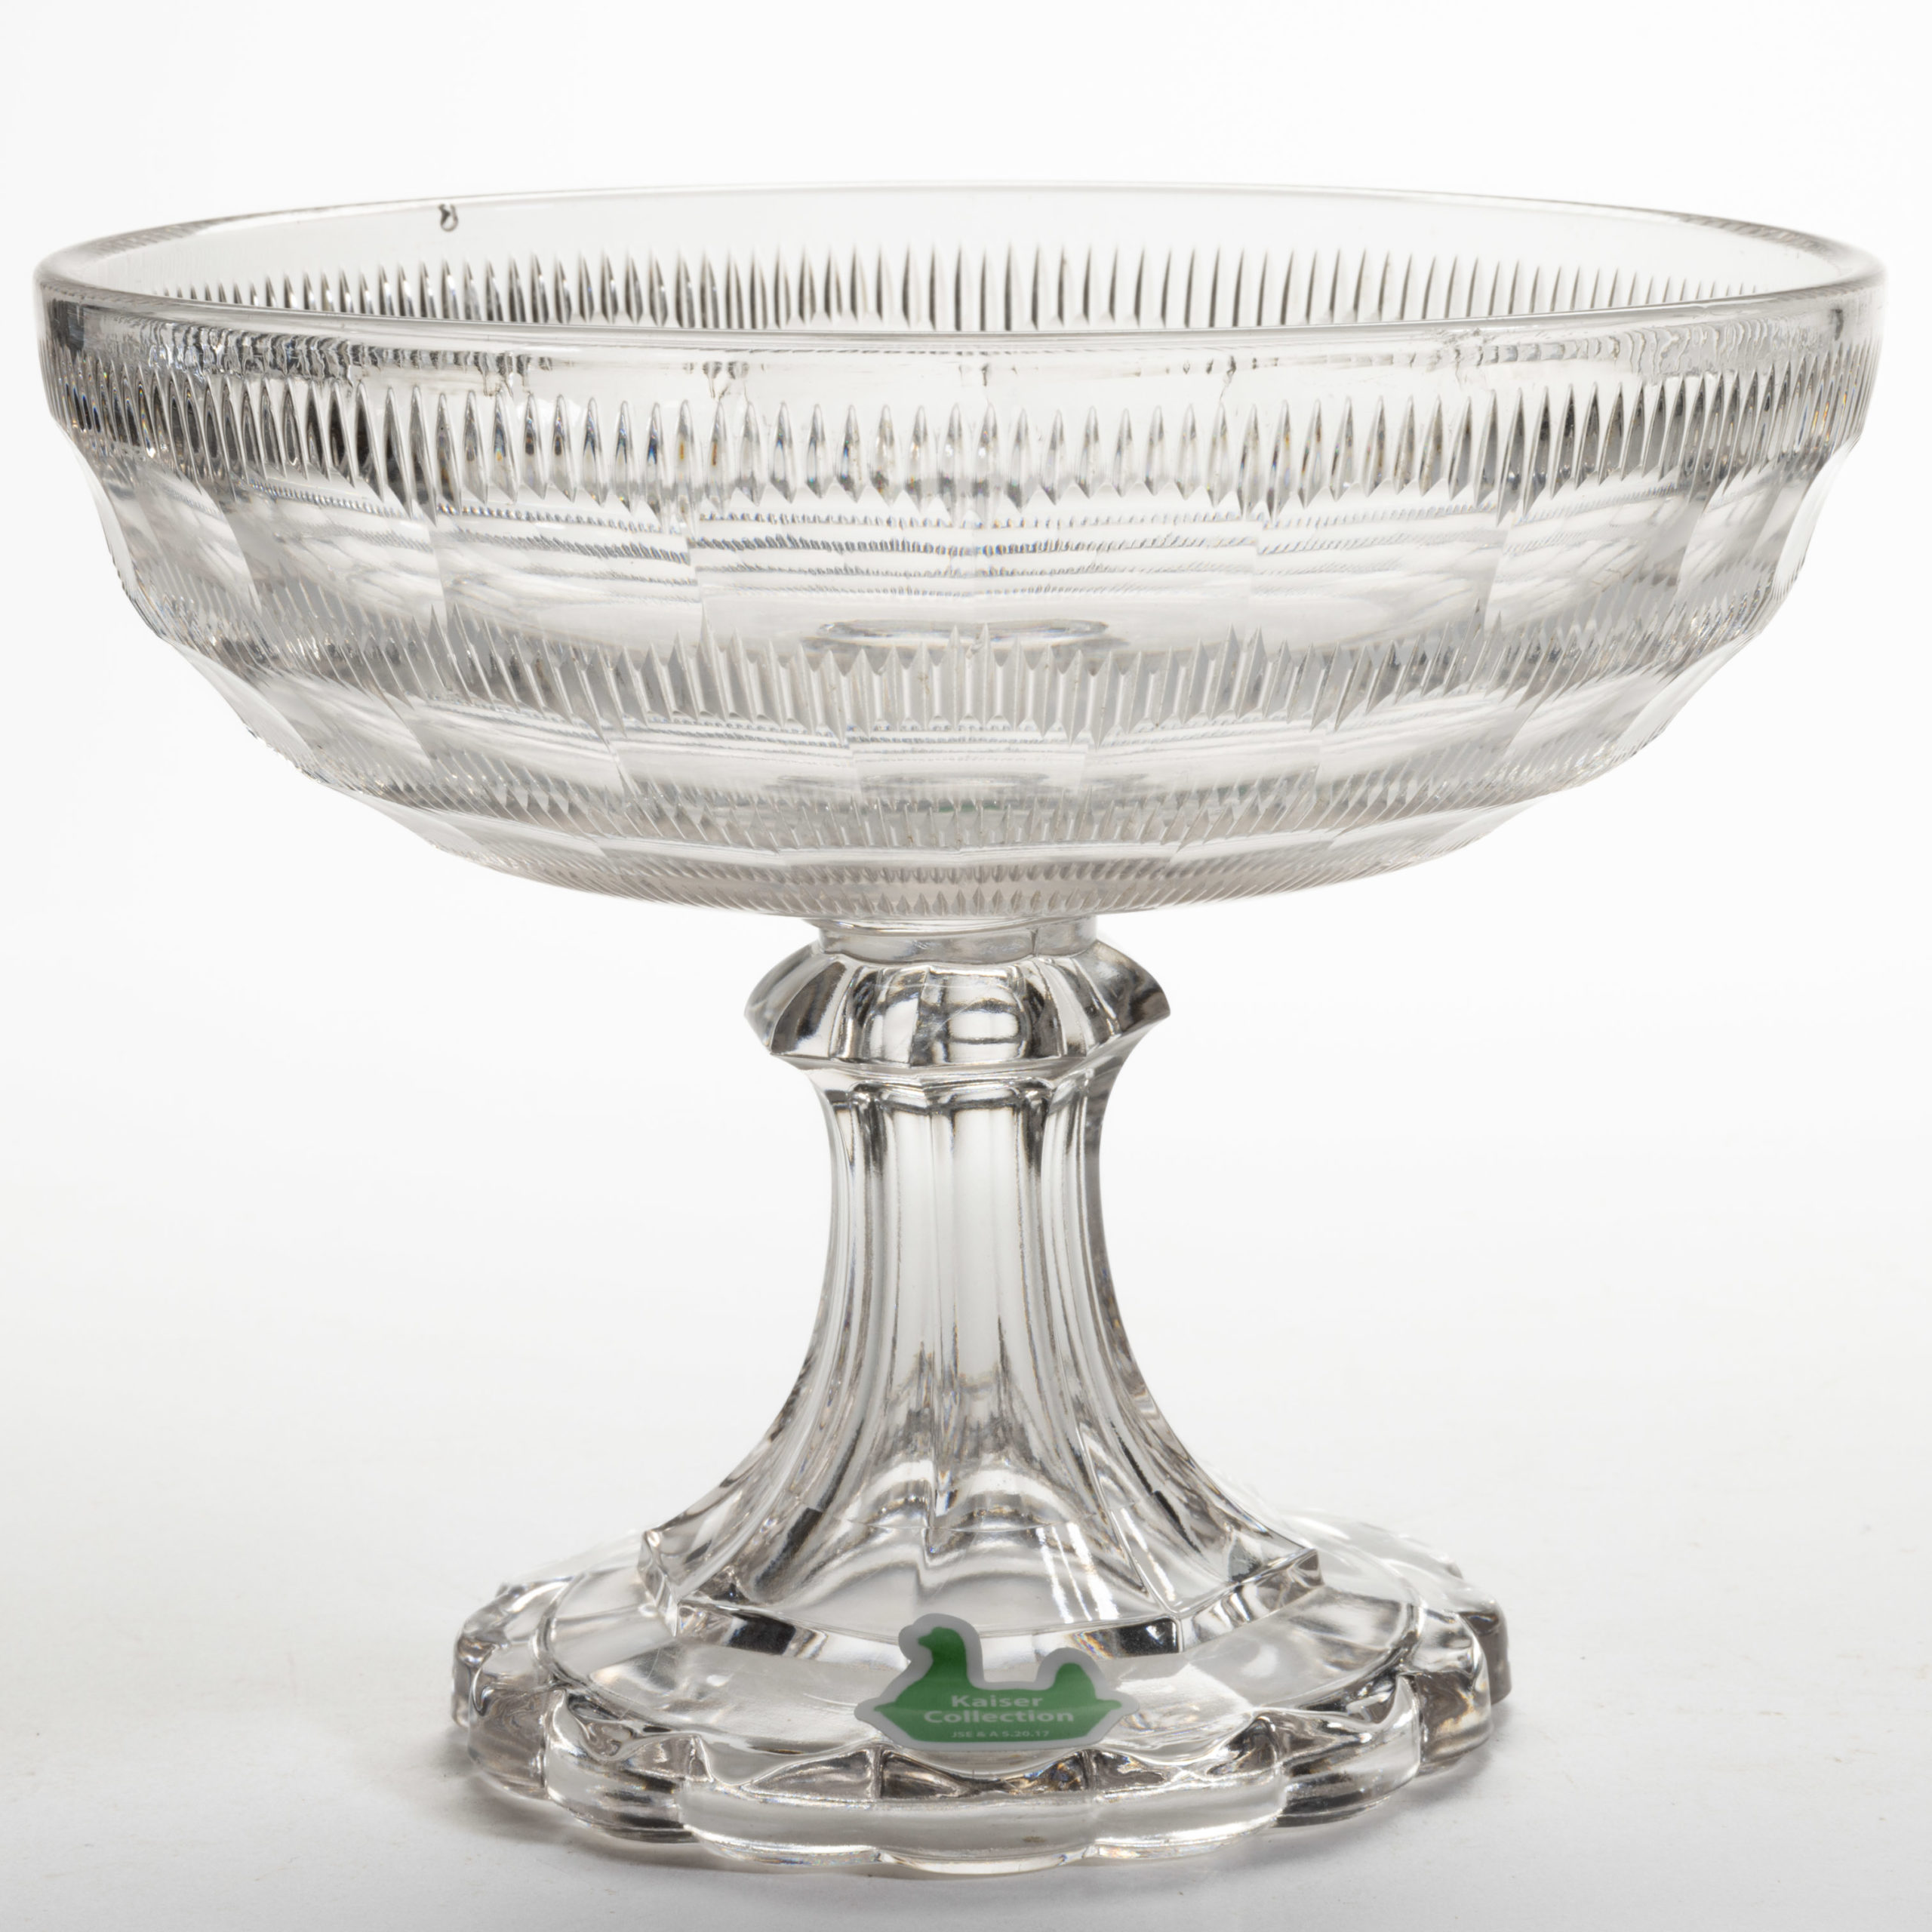 FINE RIB / REEDED (OMN) WITH CUT OVALS – THREE ROW OPEN COMPOTE,